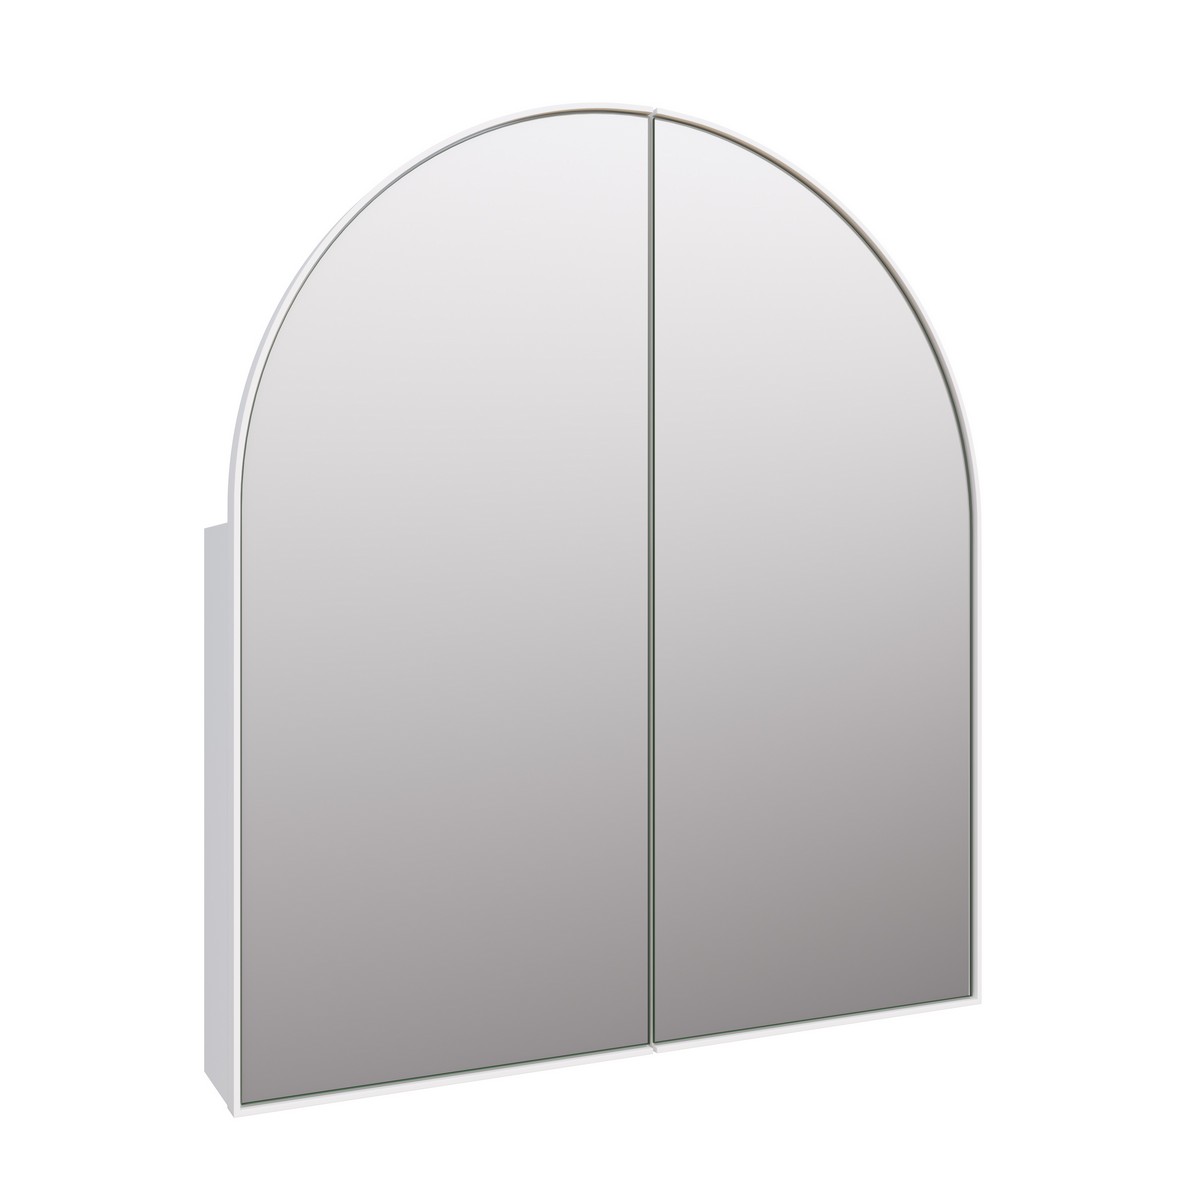 GLASS WAREHOUSE SC2-AR-30X34 ARIA 30 INCH METAL ARCHED RECESSED MEDICINE CABINET